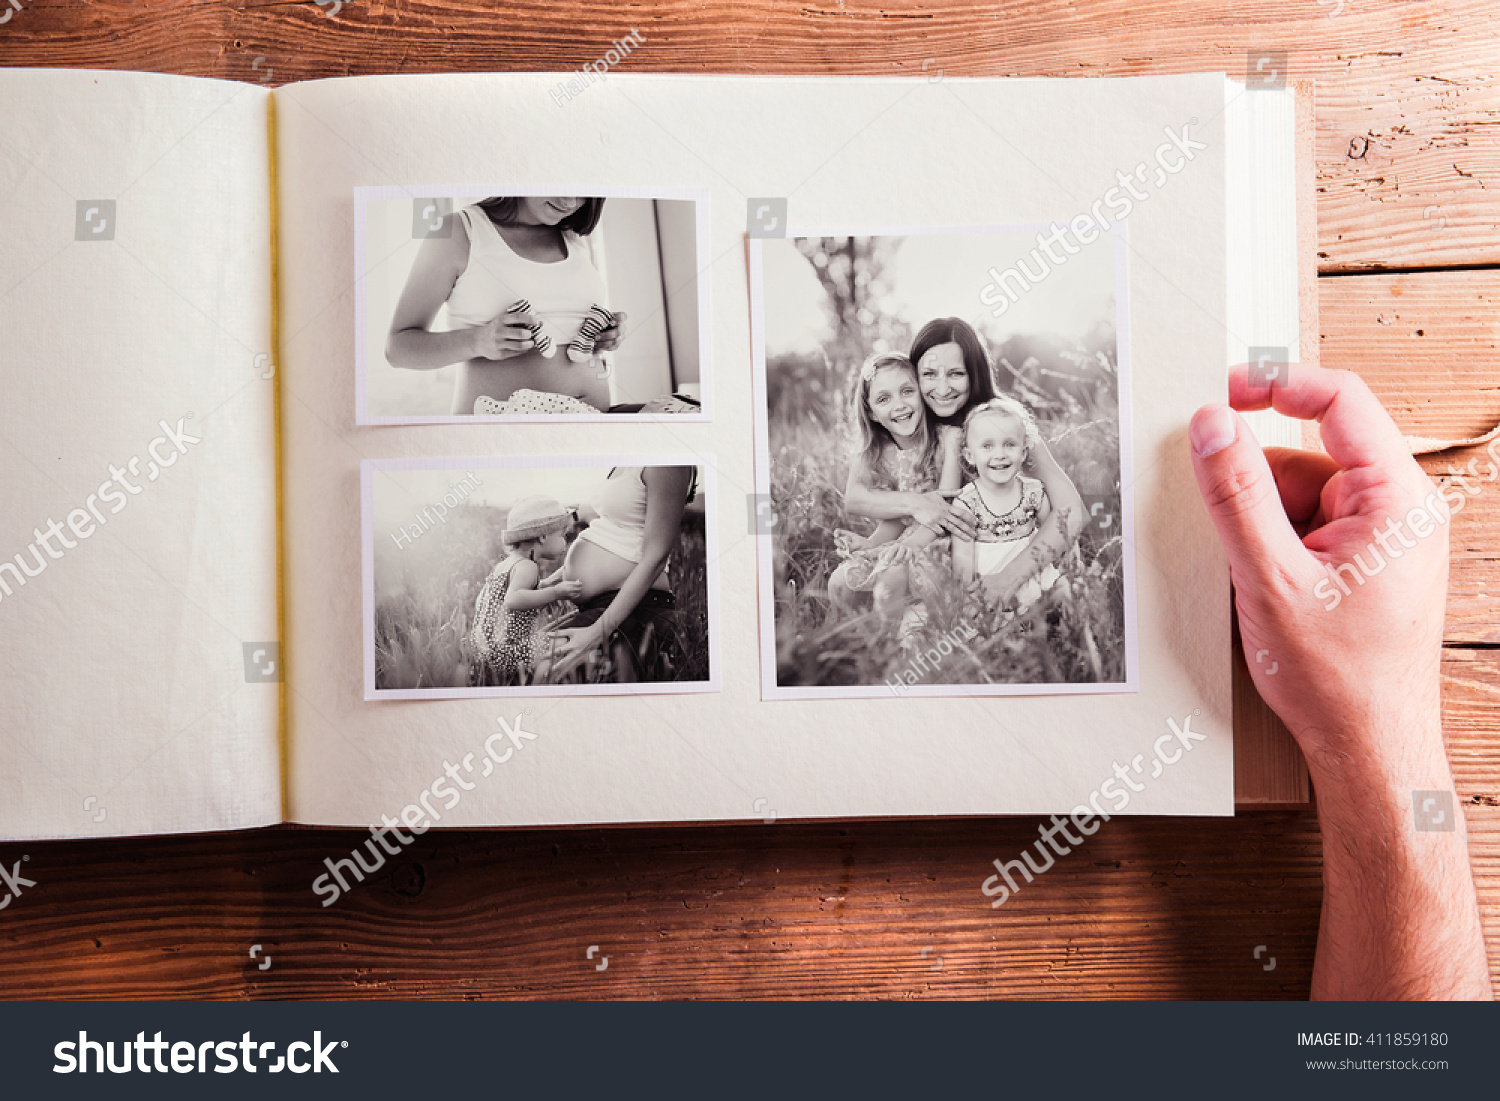 Mothers day composition. Photo album, black-and-white pictures. #411859180